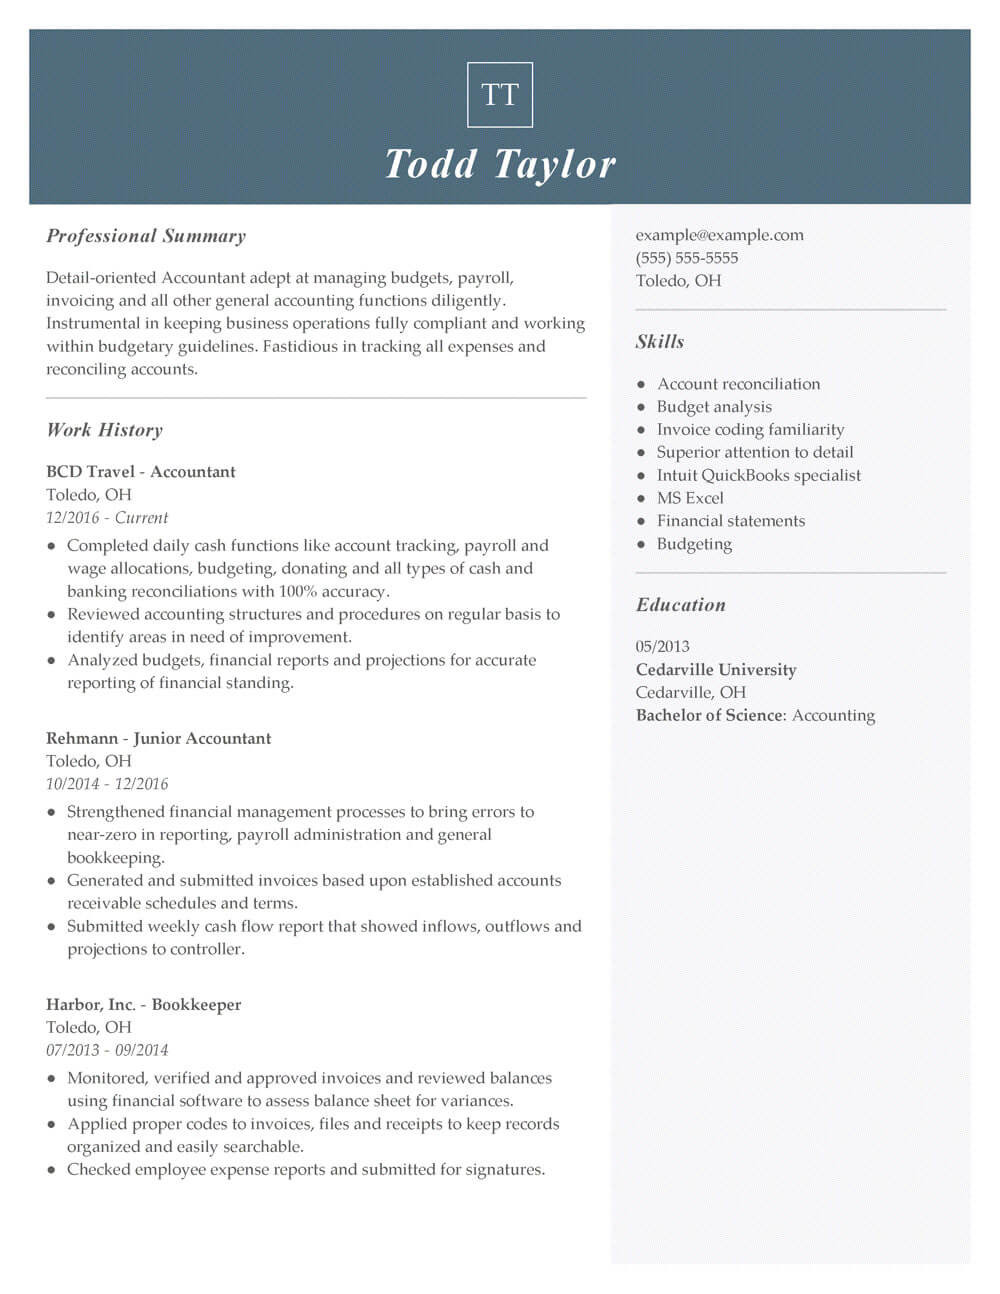 Resume Sample Of A Project Coordinator Job Hero Resume Summary: How to Write A Resume Summary   Examples